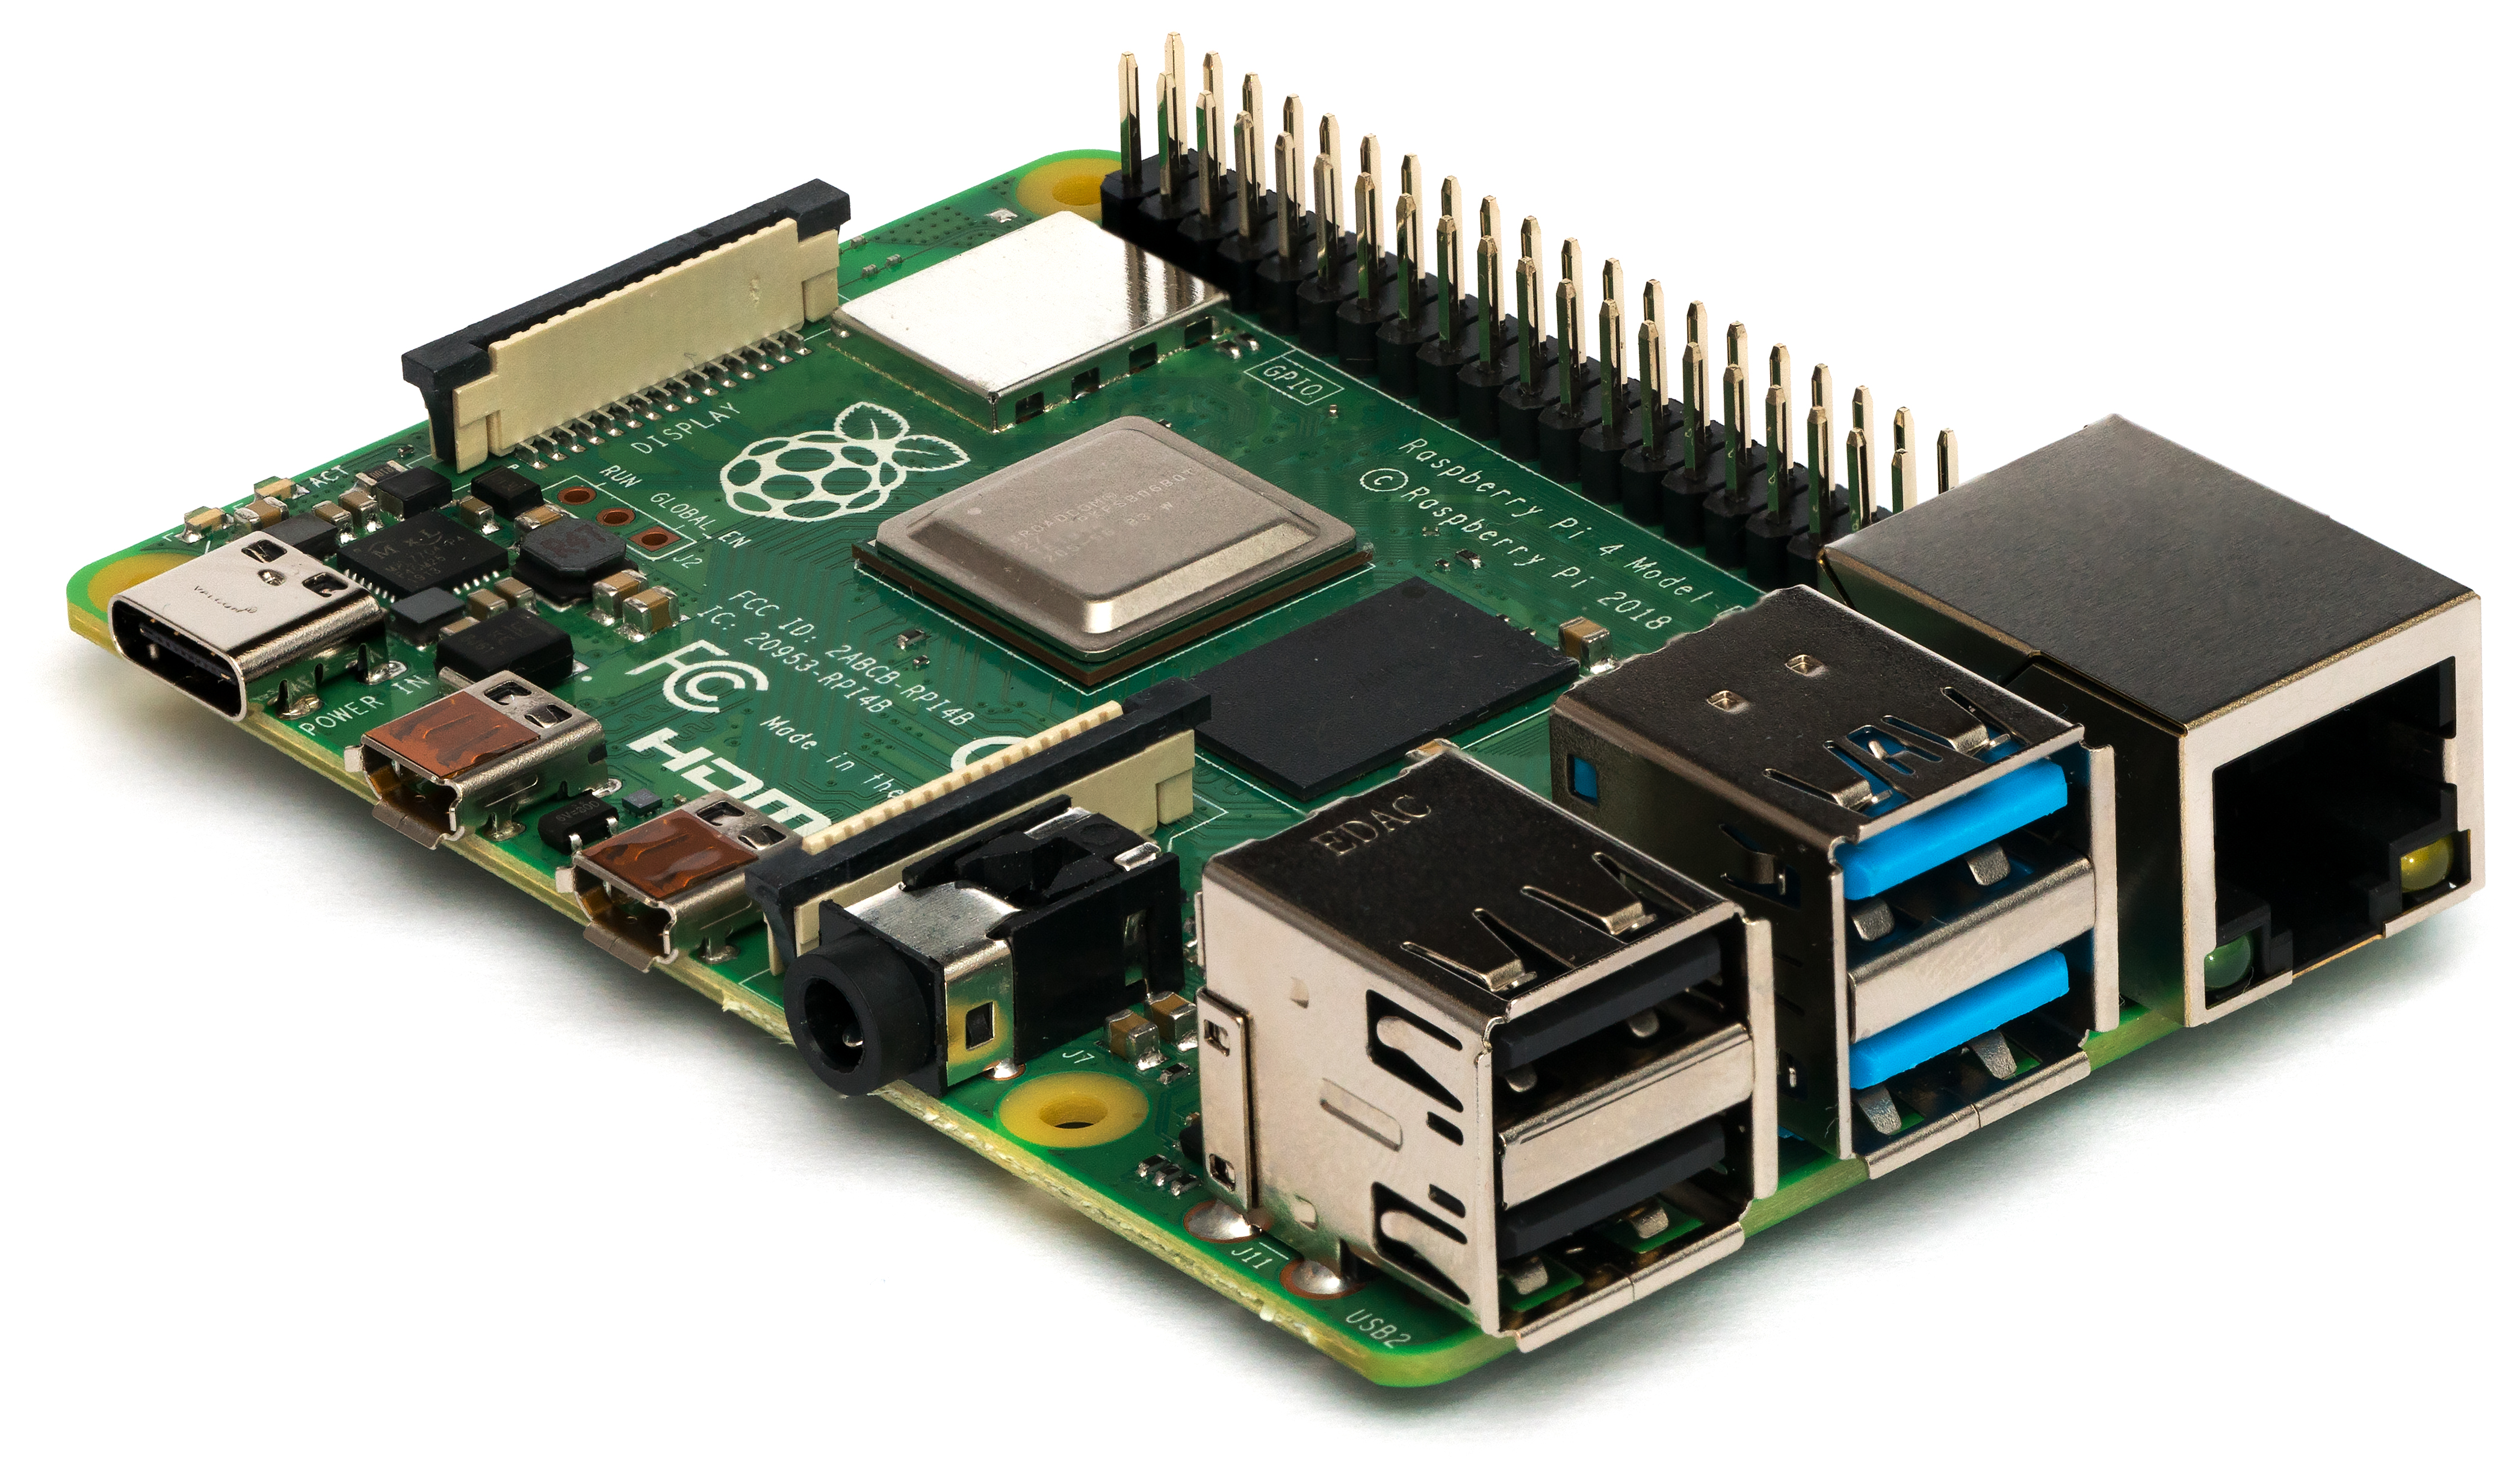 Internet of Things, robotics and prototyping. Thanks to the Raspberry Pi foundation, access to the powerfull ARM architecture is now a very playful adventure. With a rich community, building amazing project for the plateform is easy, it's even in space onboard the <a href='https://www.raspberrypi.org/blog/astro-pi-upgrades/'>International Space Station</a> since 2015. Don't worry it got upgraded since then...